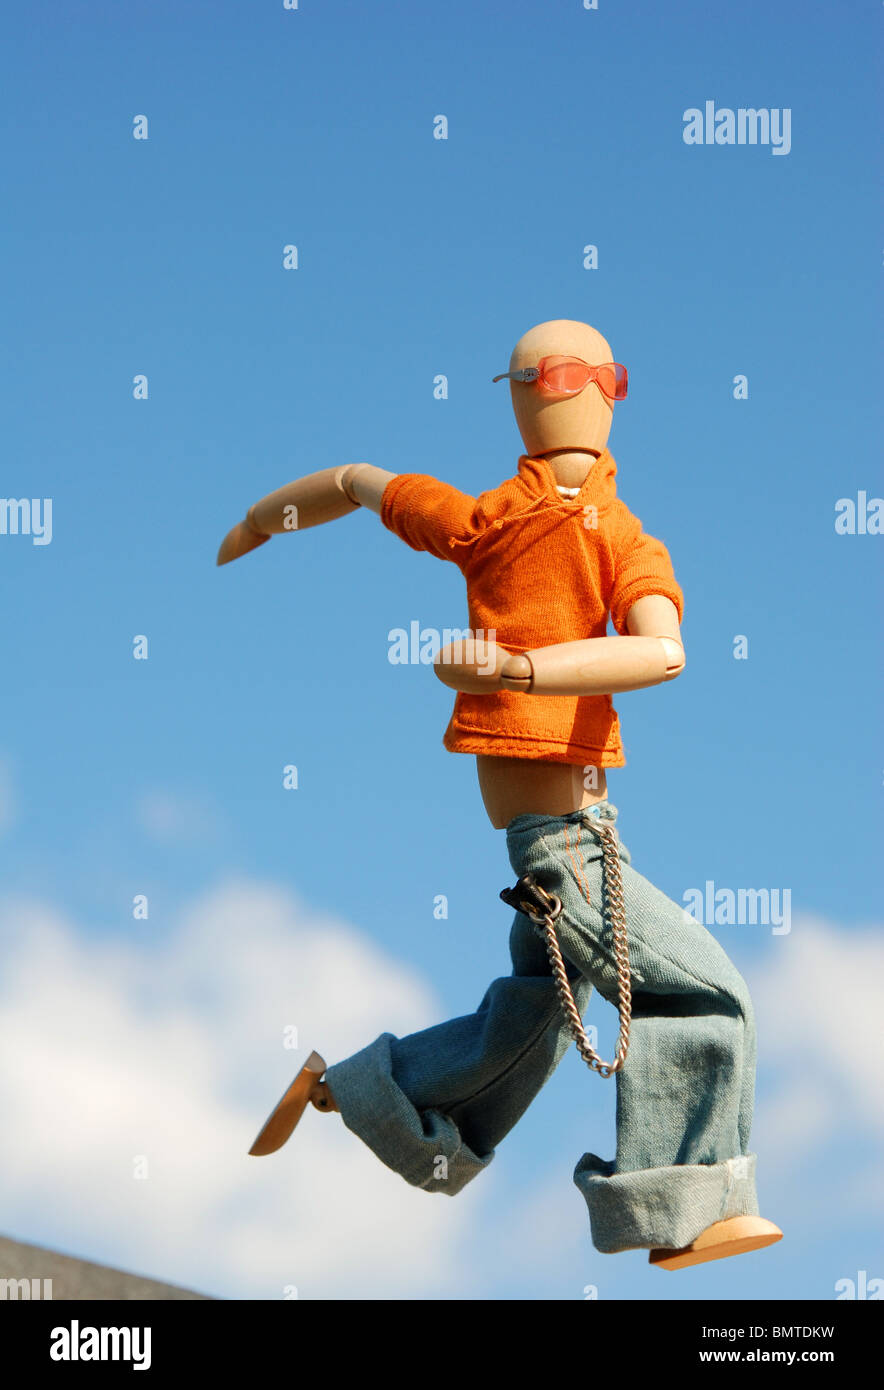 Wooden art model figure running with the sky in the background. Stock Photo